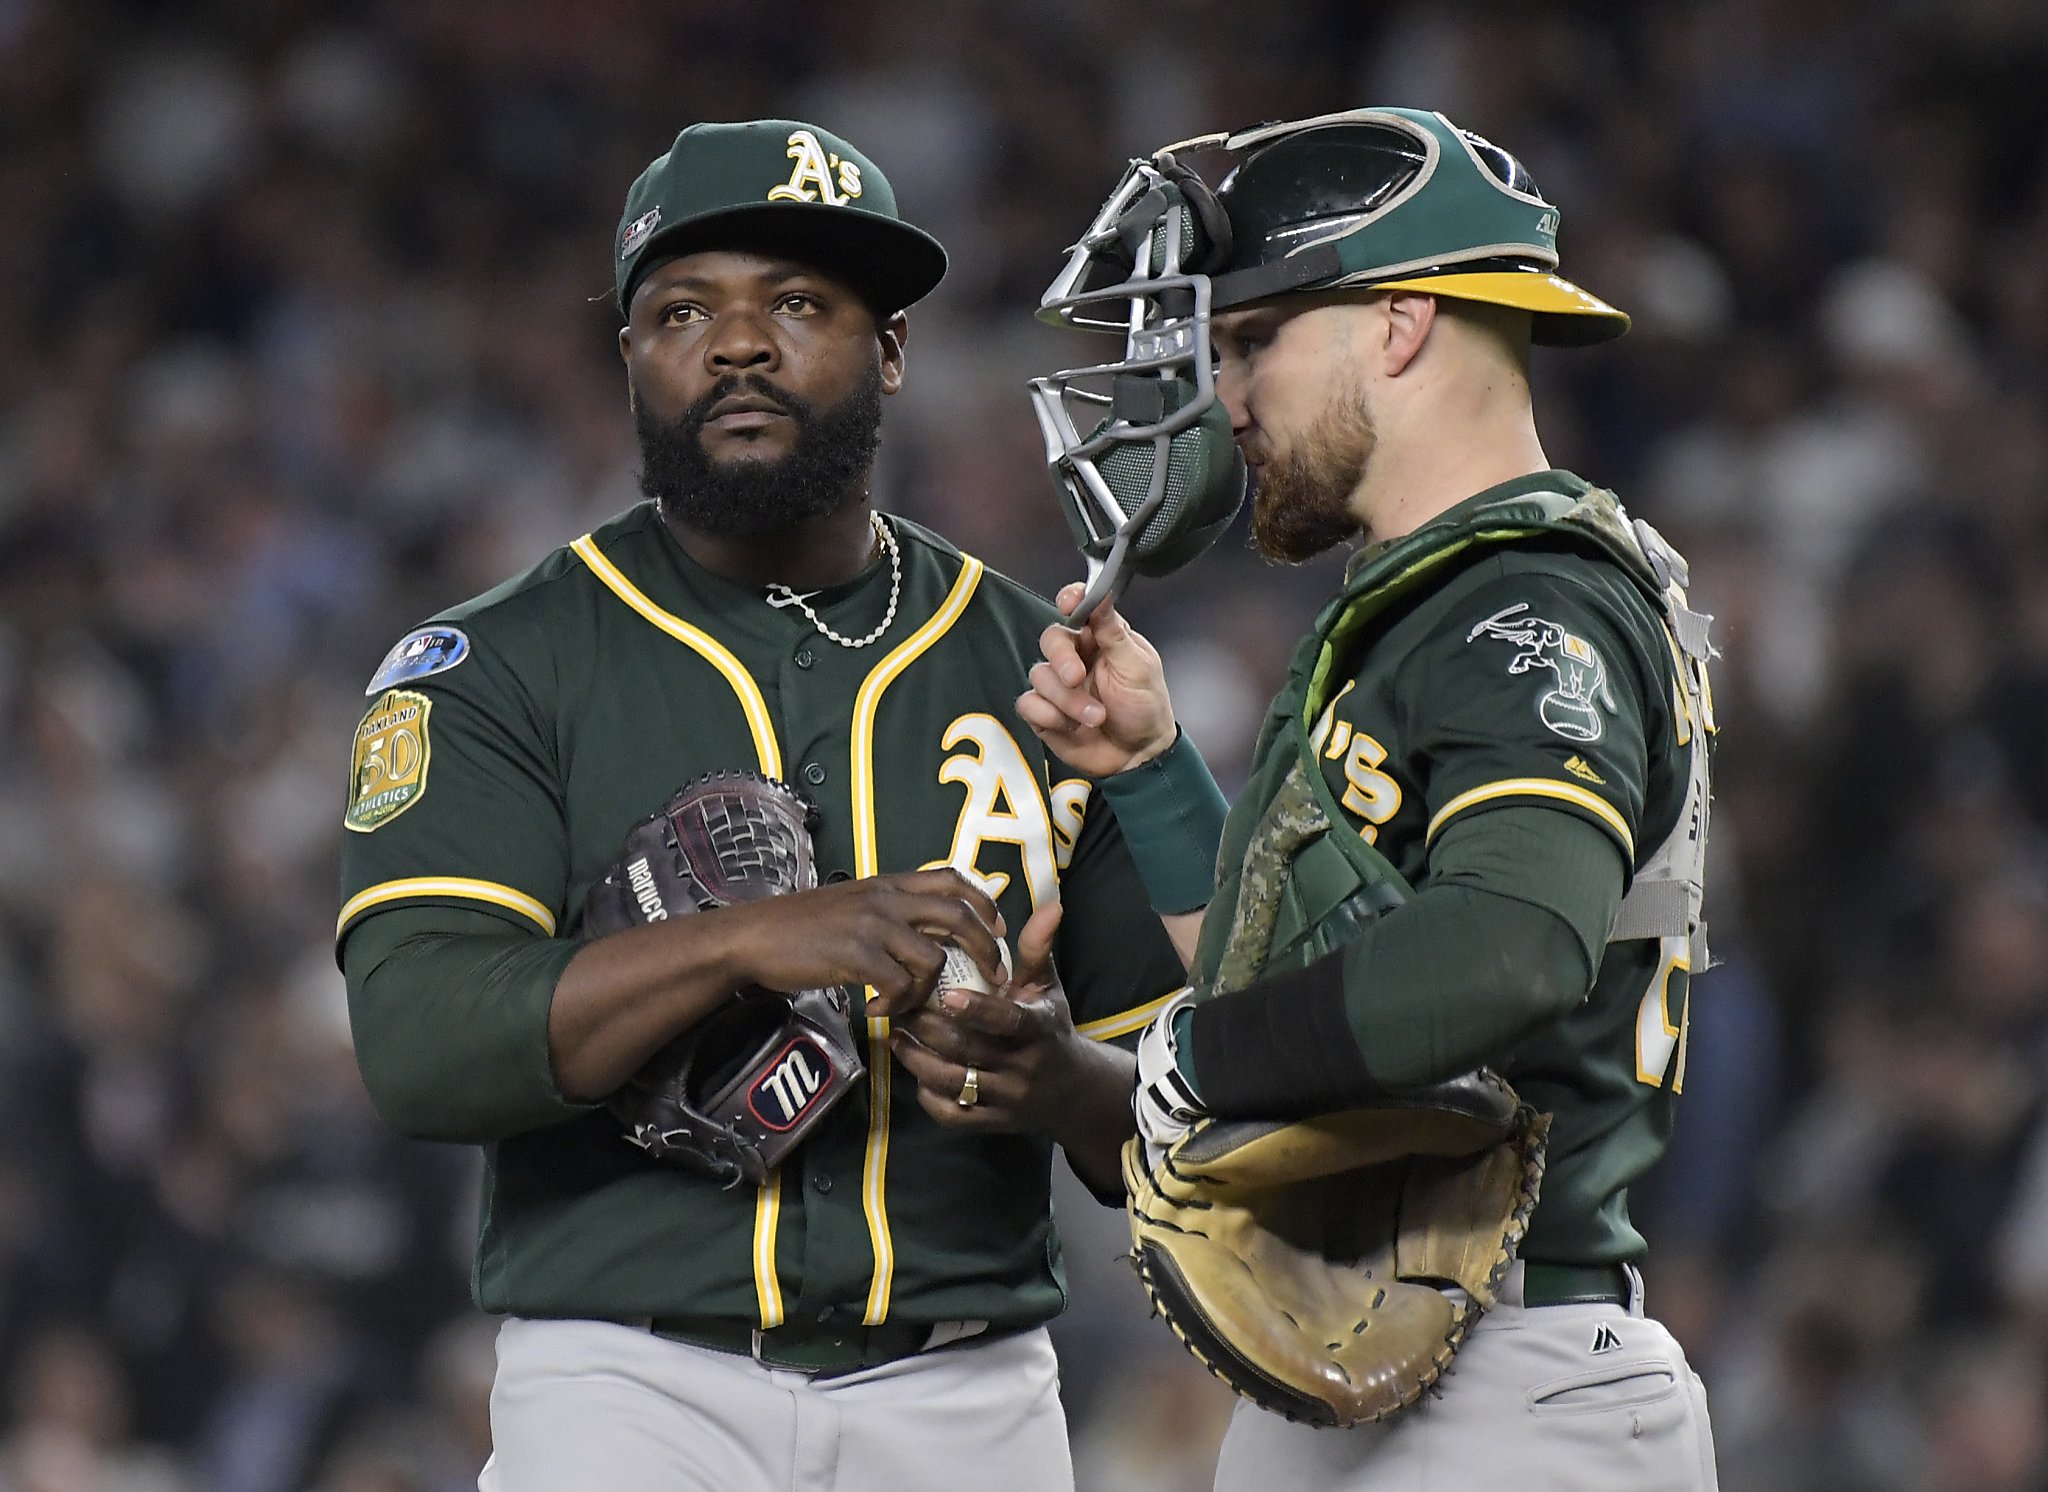 A's try another tactic, but still no playoff success